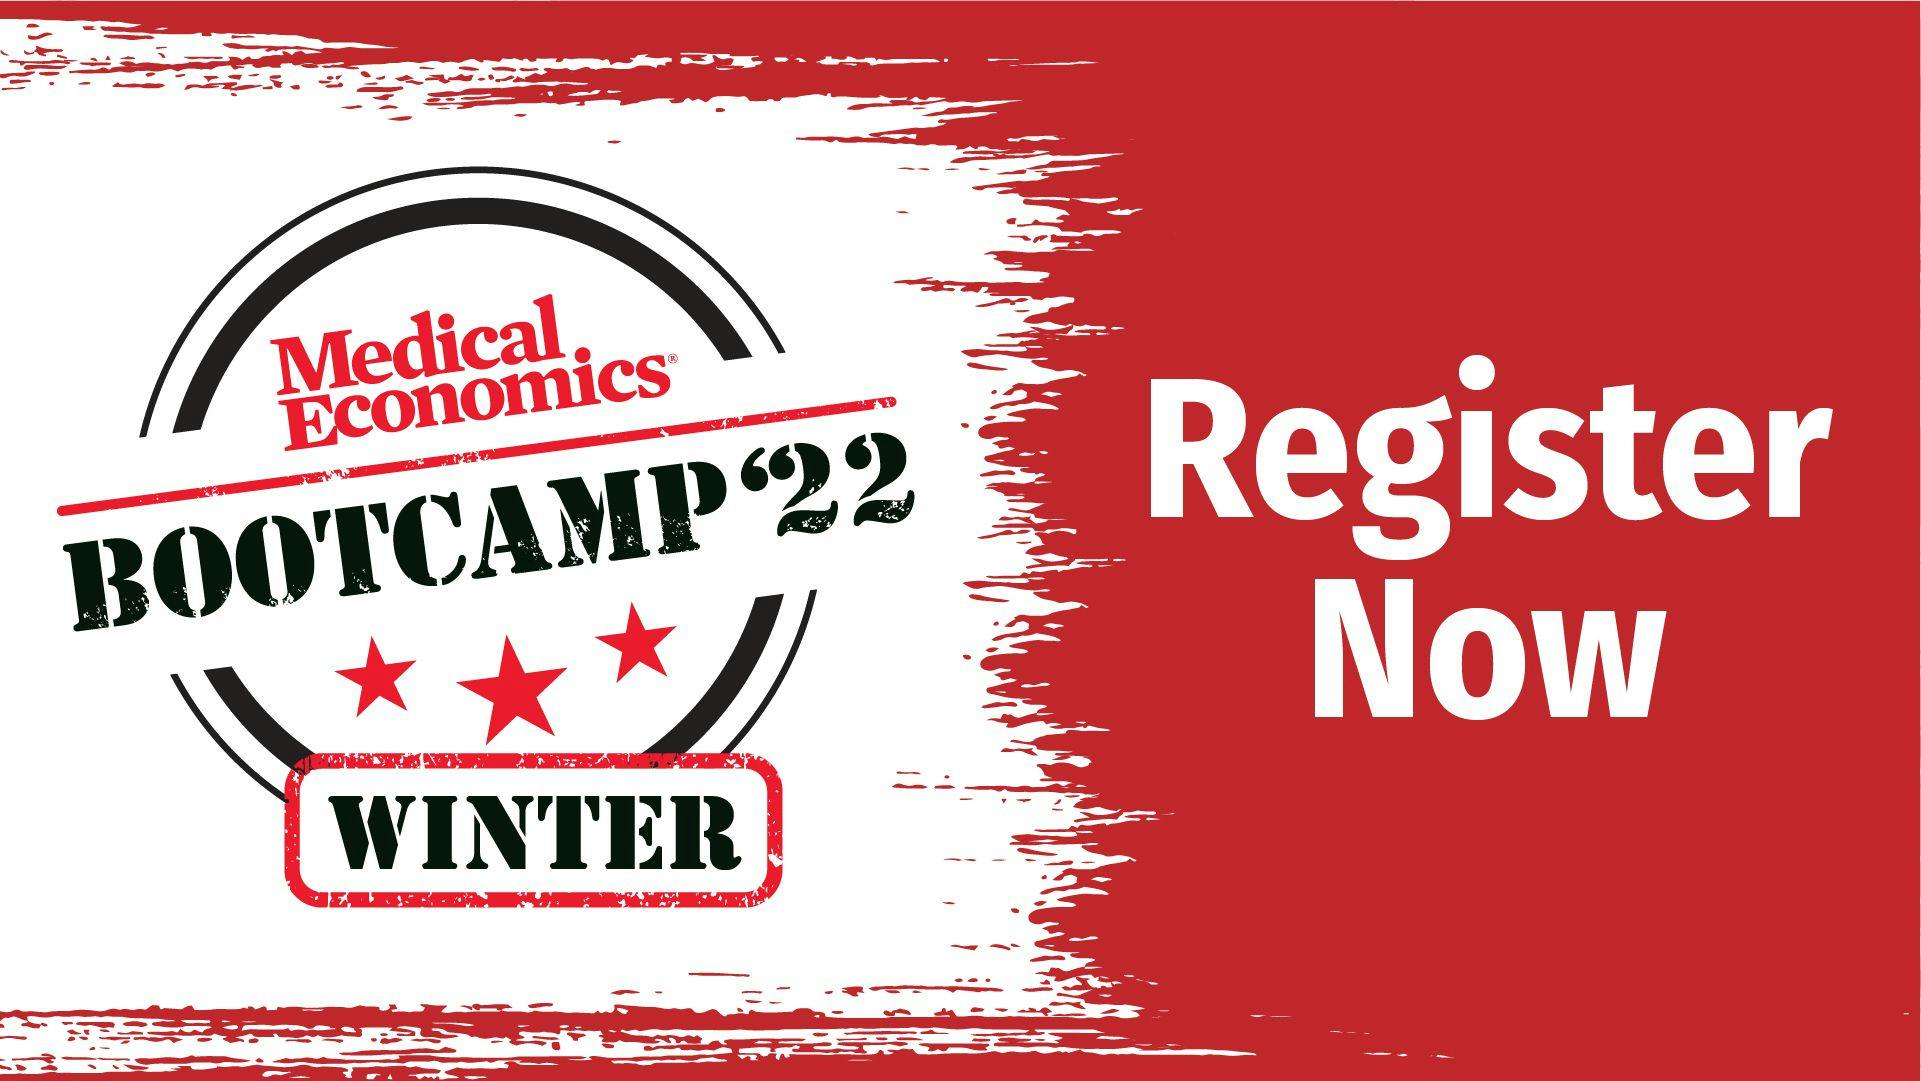 Sign up now: Winter Physician Bootcamp is Nov. 17